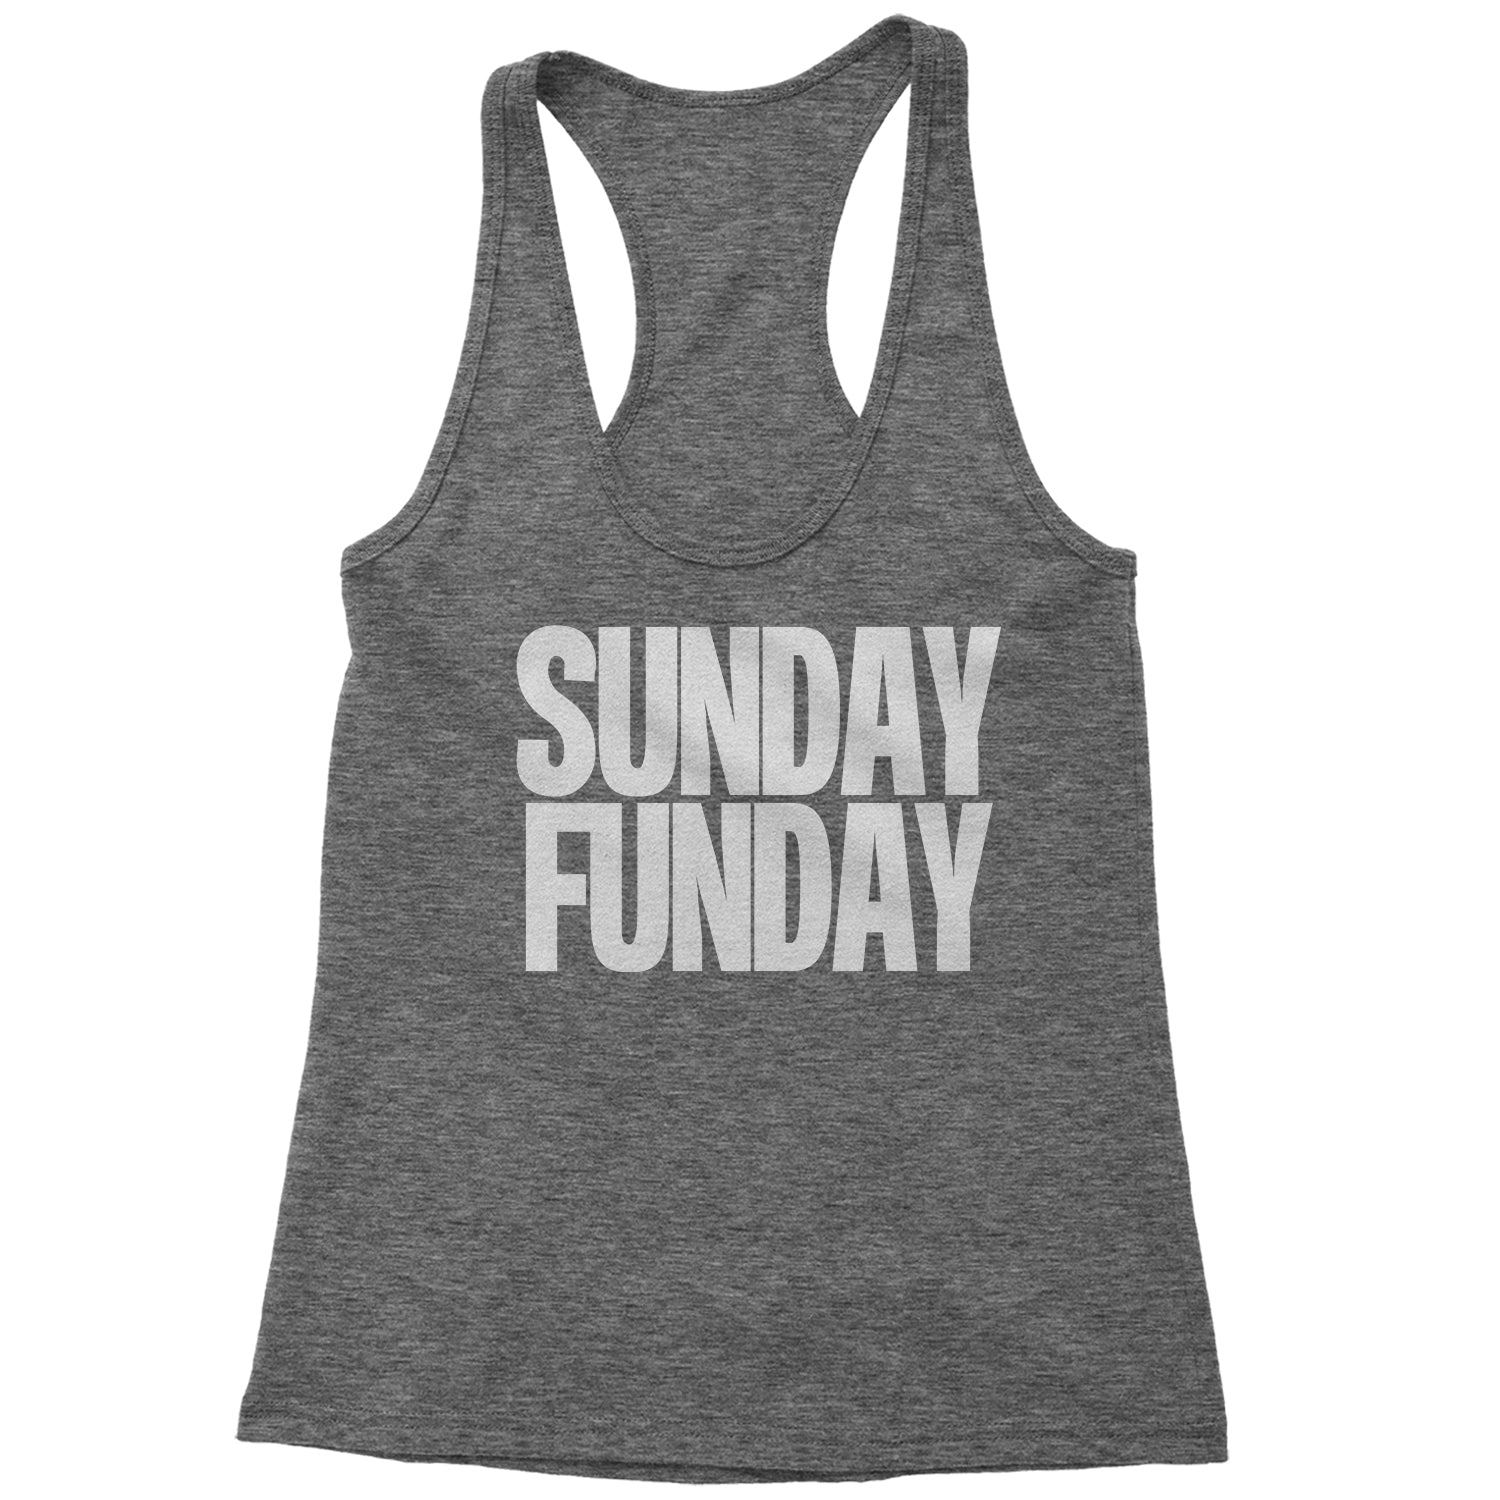 Sunday Funday Racerback Tank Top for Women day, drinking, fun, funday, partying, sun, Sunday by Expression Tees